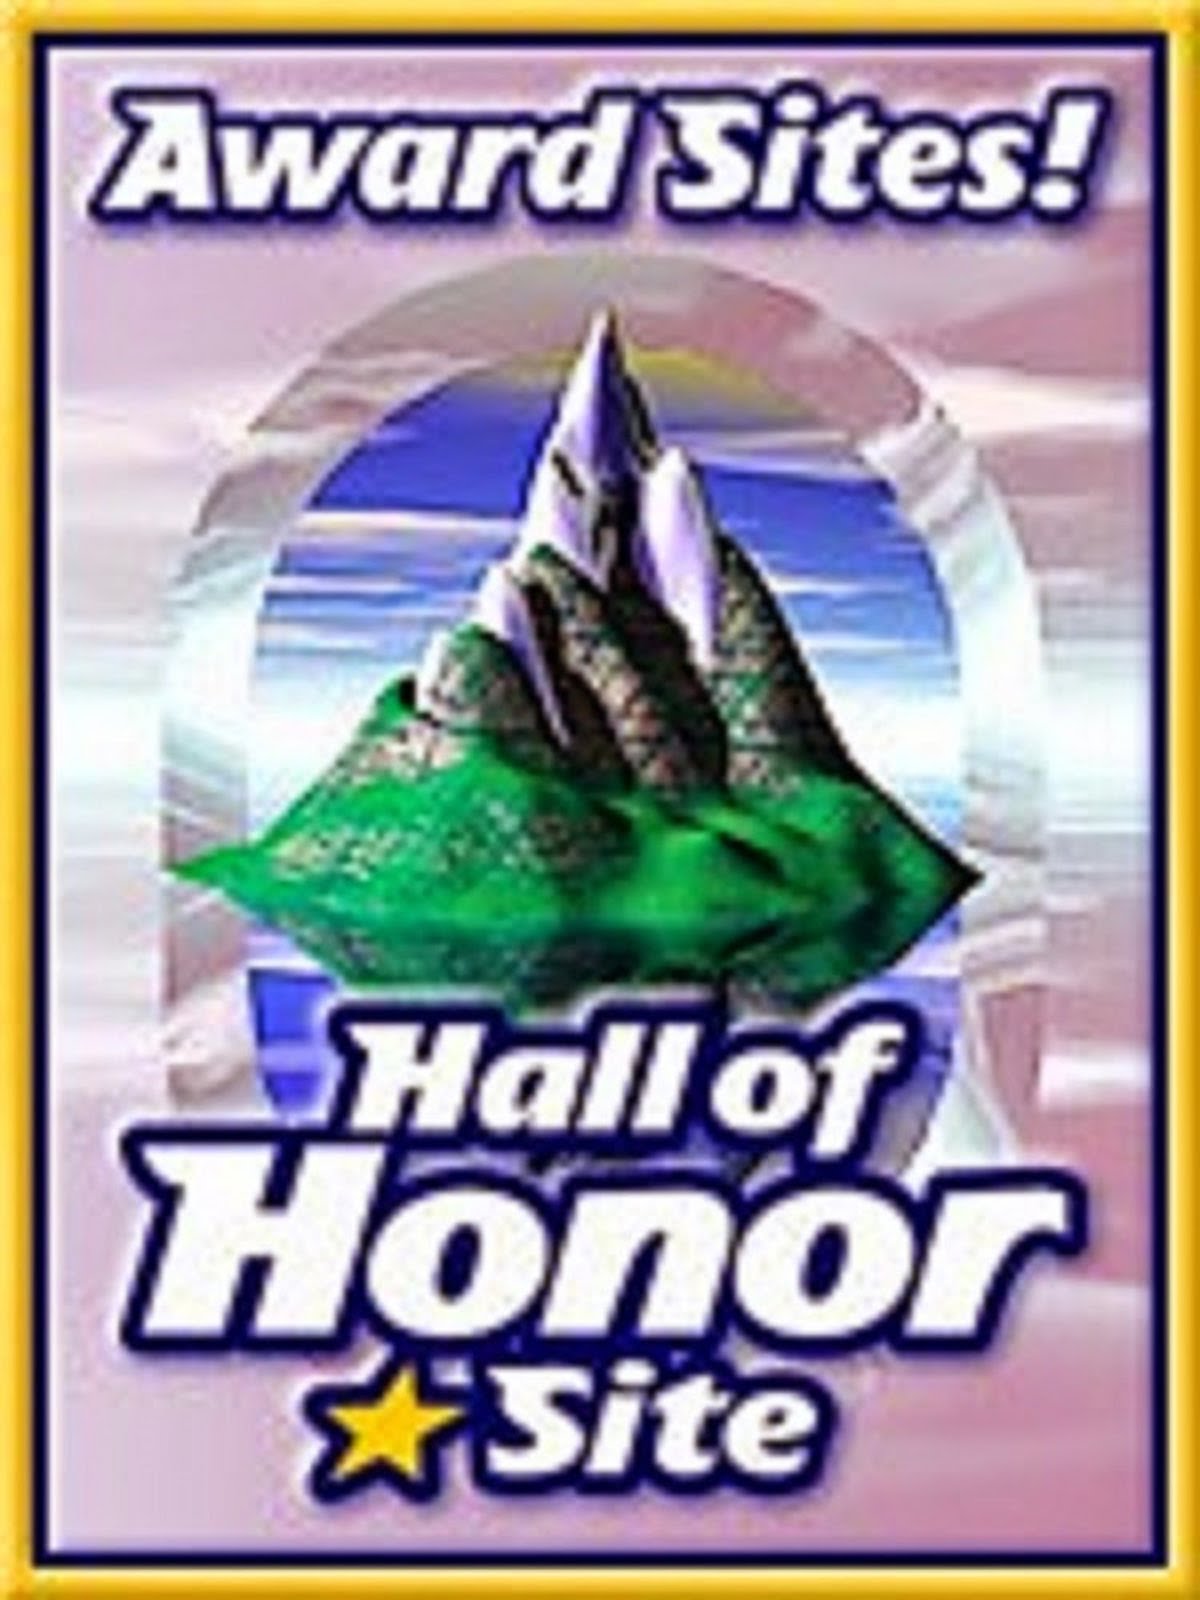 HALL OF HONOR -  AWARD SITES